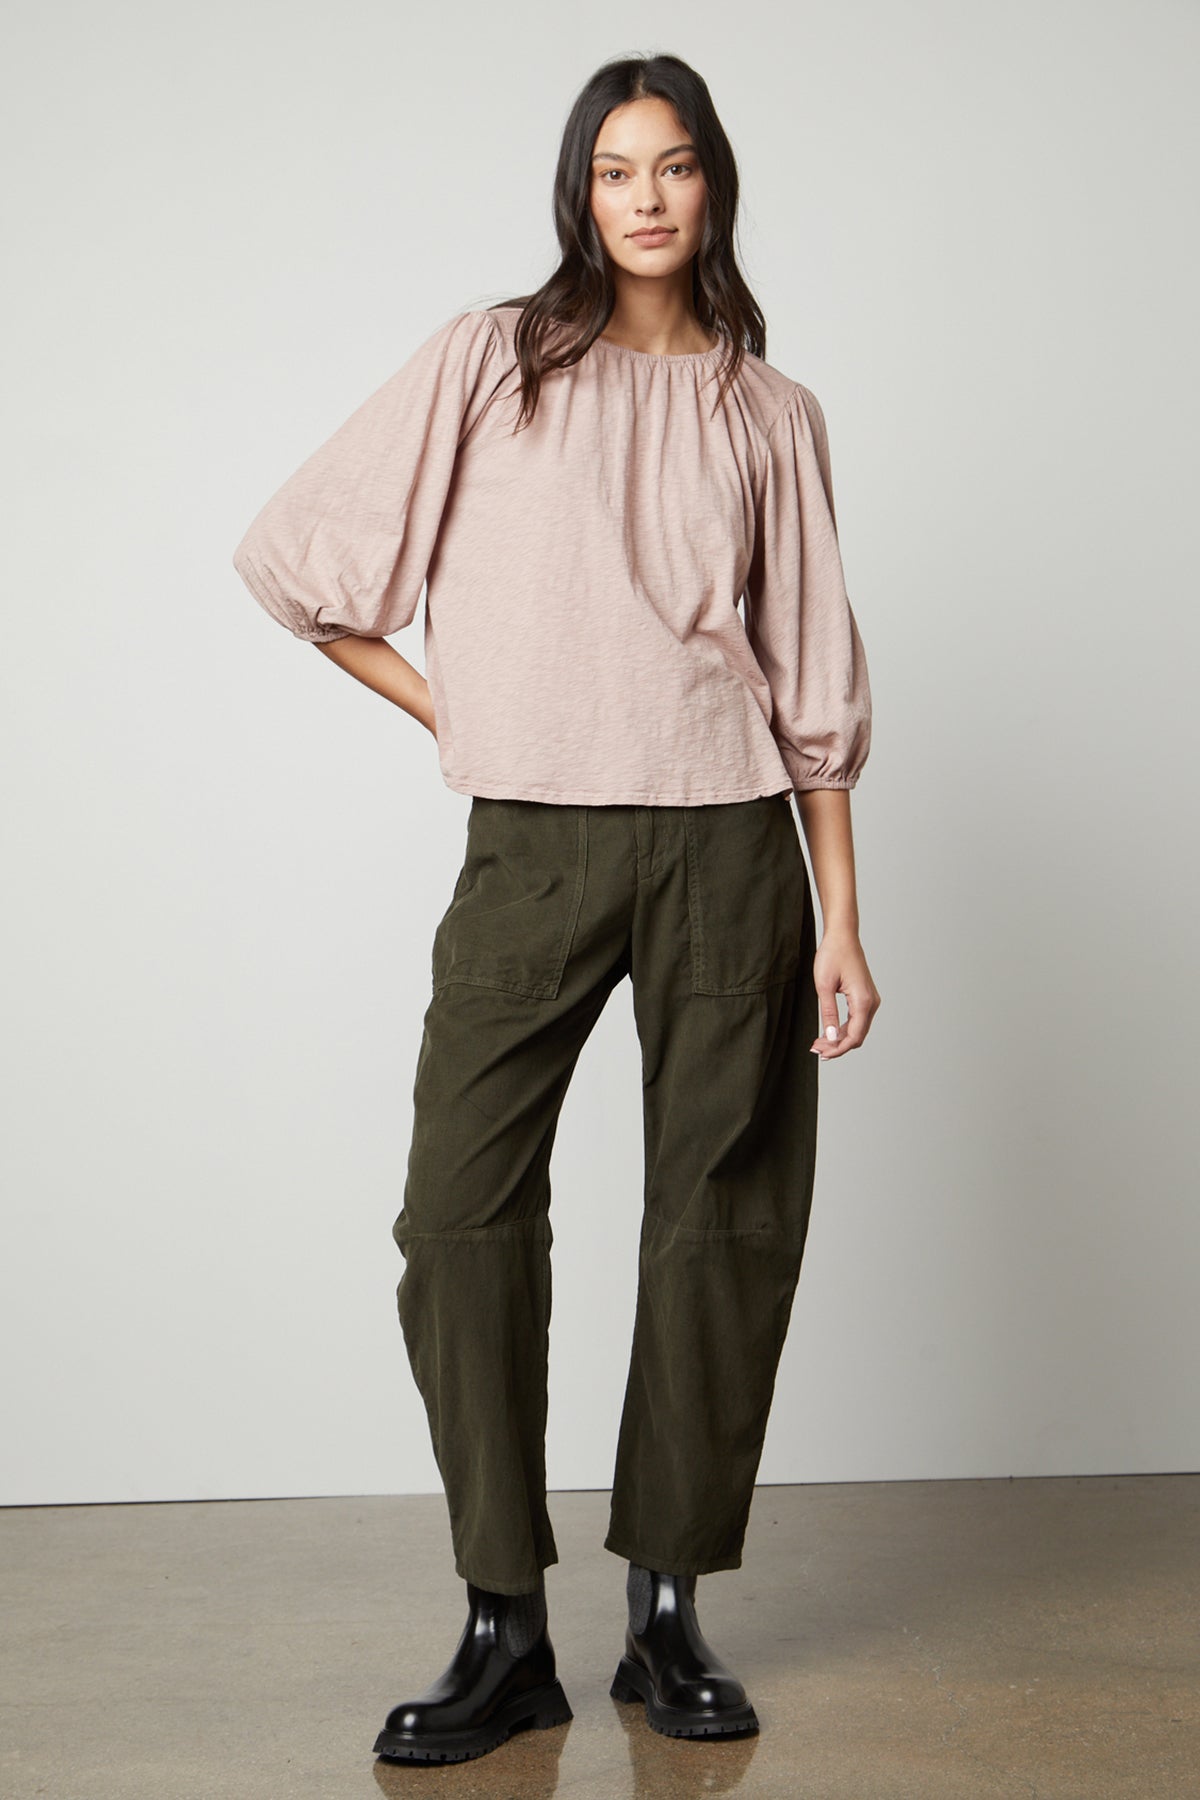   The model is wearing olive trousers and a Velvet by Graham & Spencer JULIE 3/4 SLEEVE TEE. 